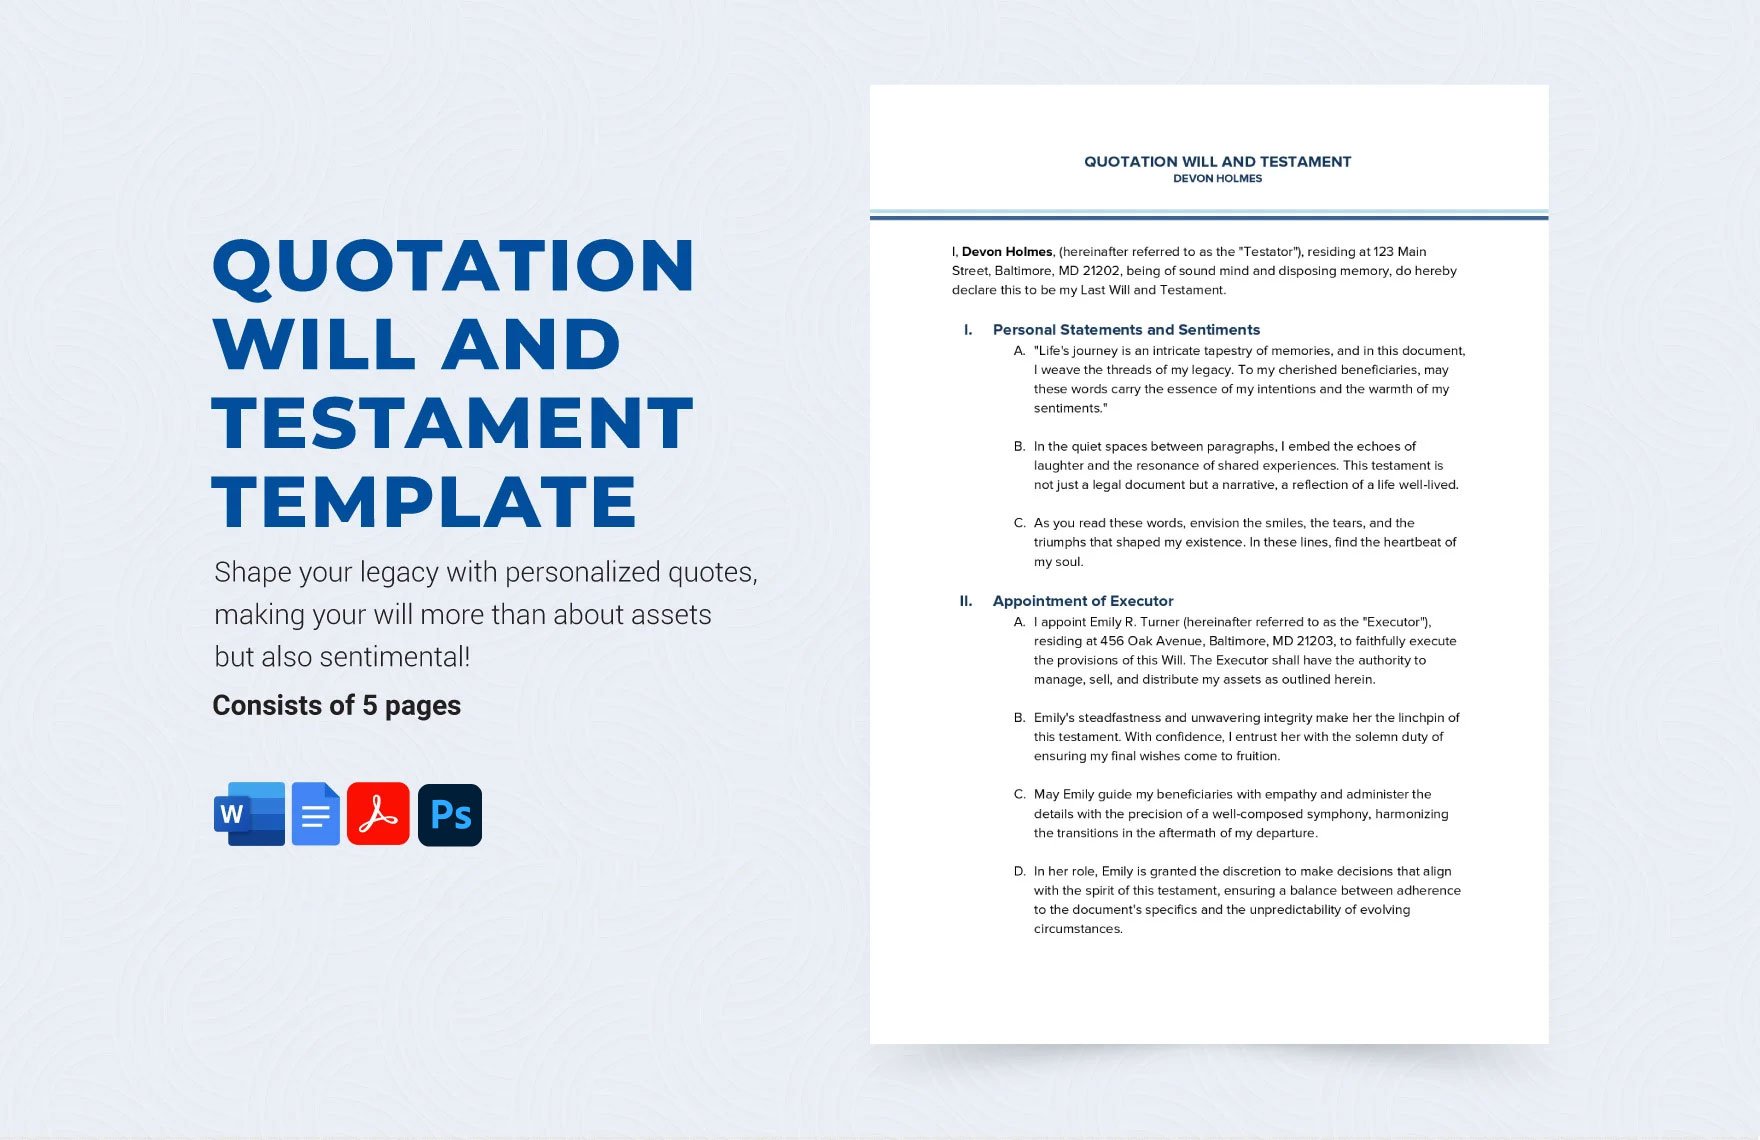 Quotation Will and Testament Template